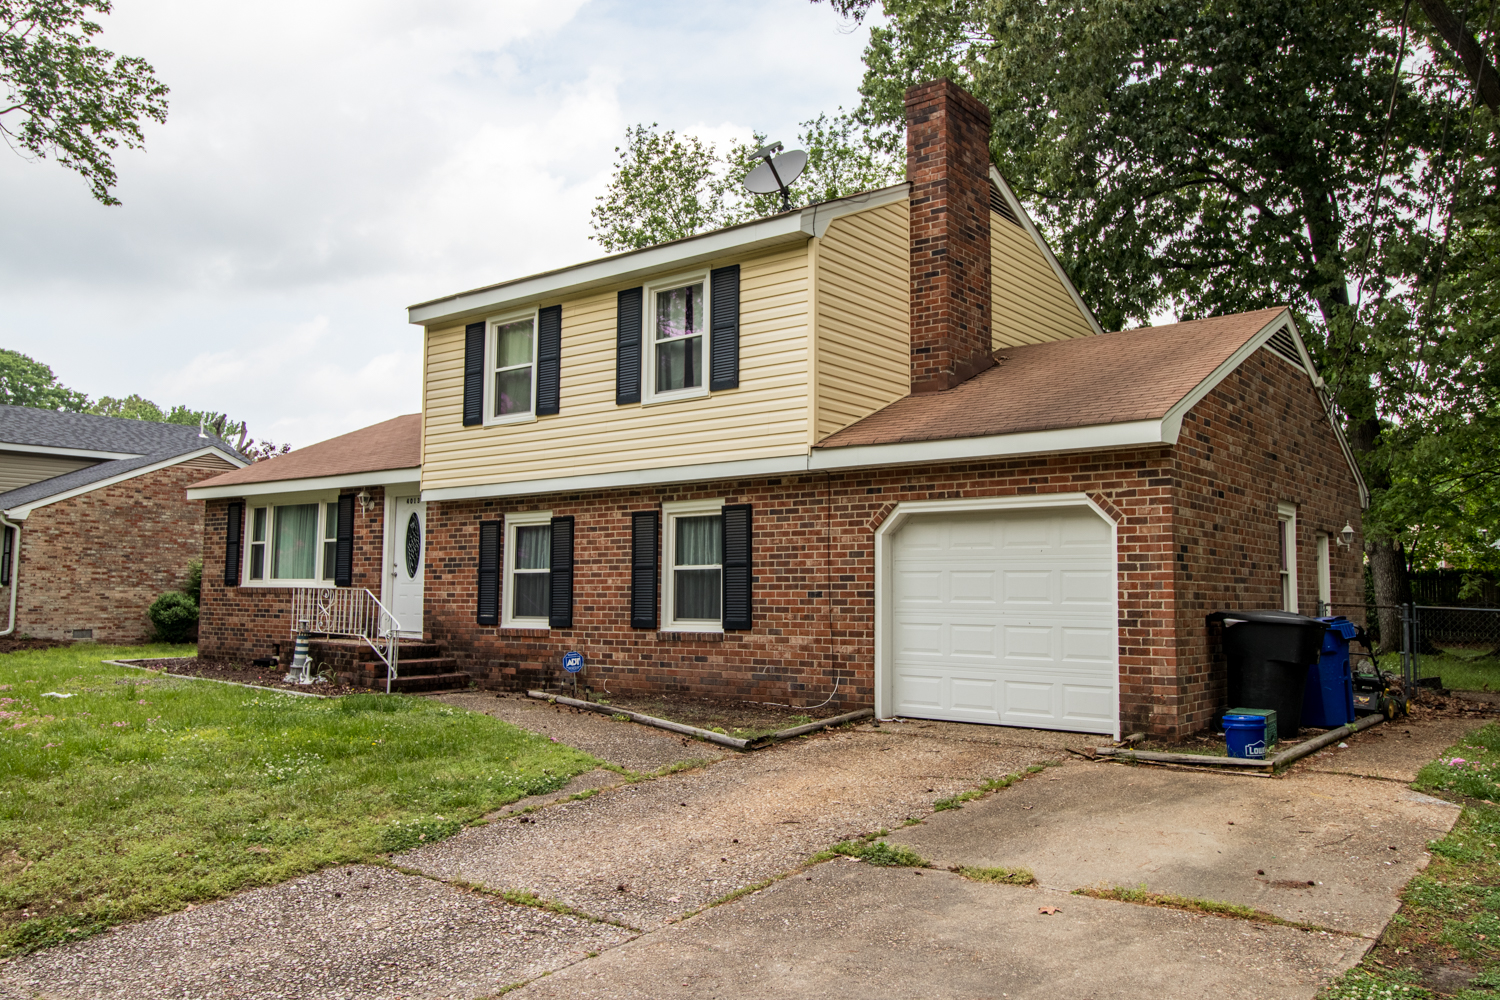 4013 Timberland Dr Portsmouth - MLS (2 of 19).jpg